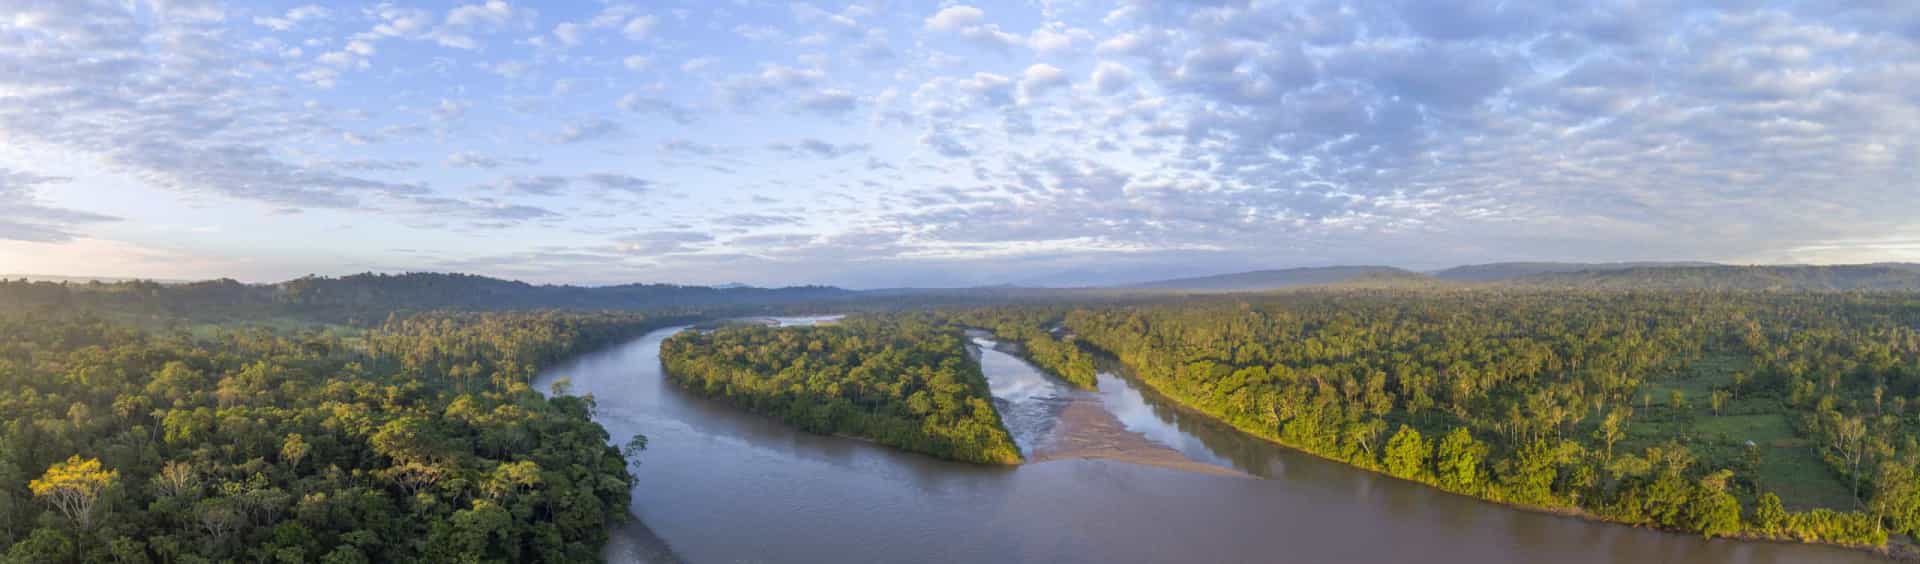 <p>A trip to the <span>Ecuadorian Amazon</span> can be an eye-opening experience for the naturally humanitarian Aquarian. There they will be educated by the indigenous peoples' lives and spirituality, which they would totally embrace.</p>